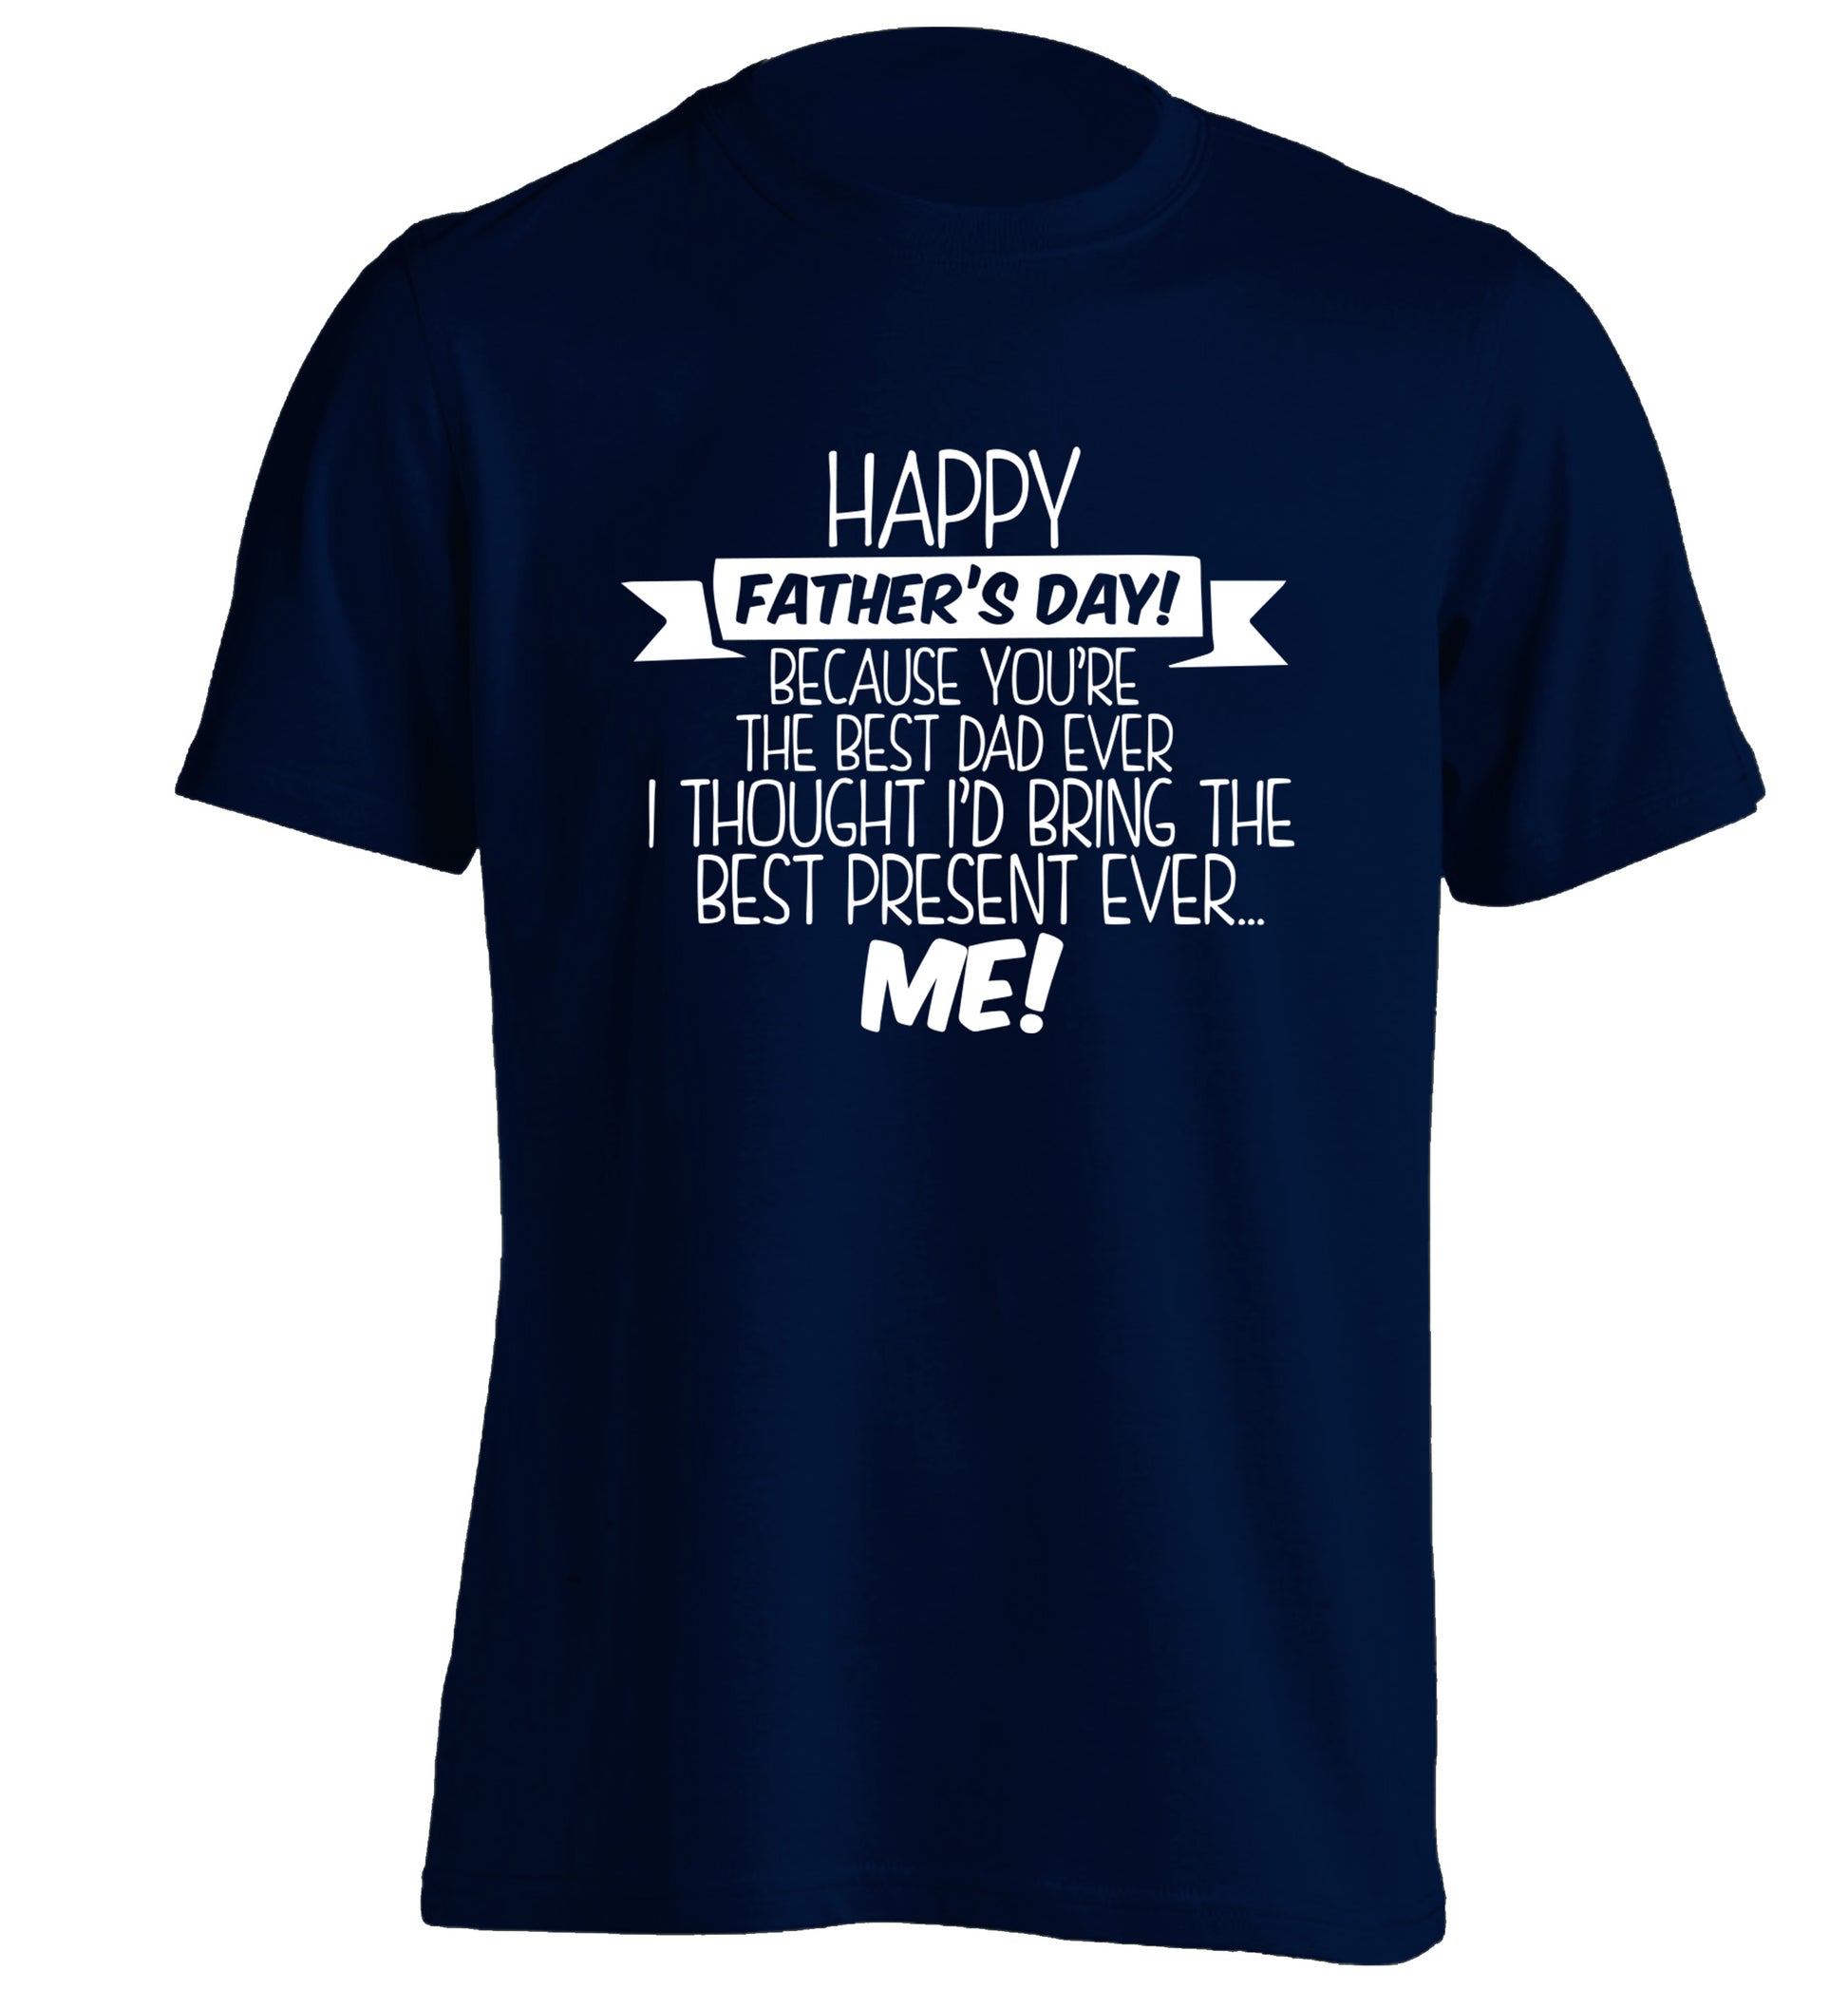 Happy Father's day, because you're the best dad ever I thought I'd bring the best present ever...me! adults unisex navy Tshirt 2XL